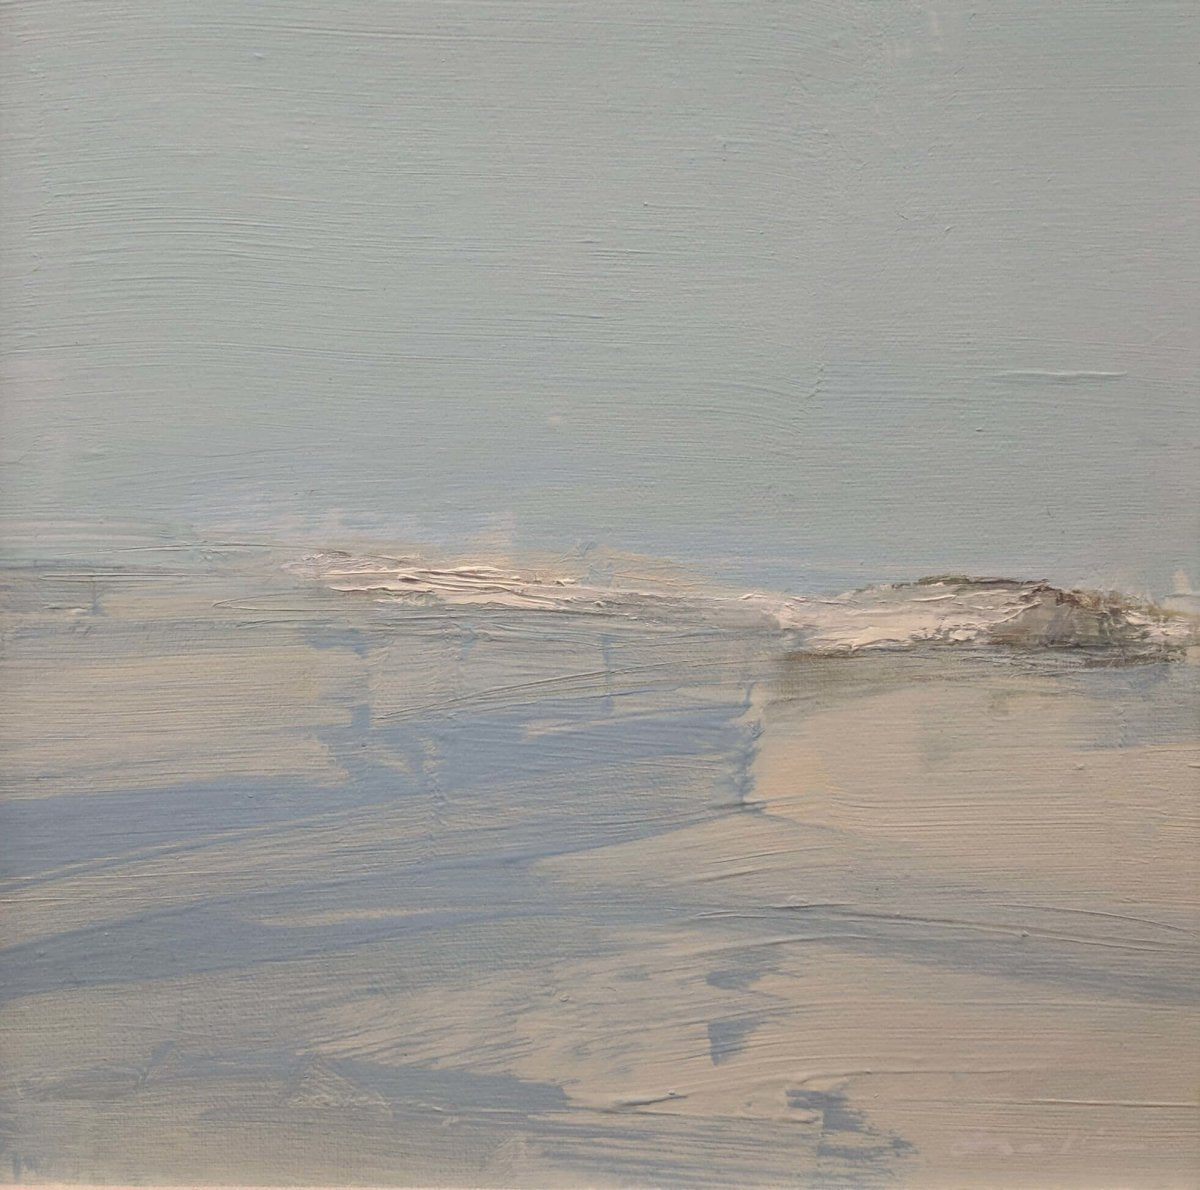 Behind the Dunes by Deborah Hill at LePrince Galleries